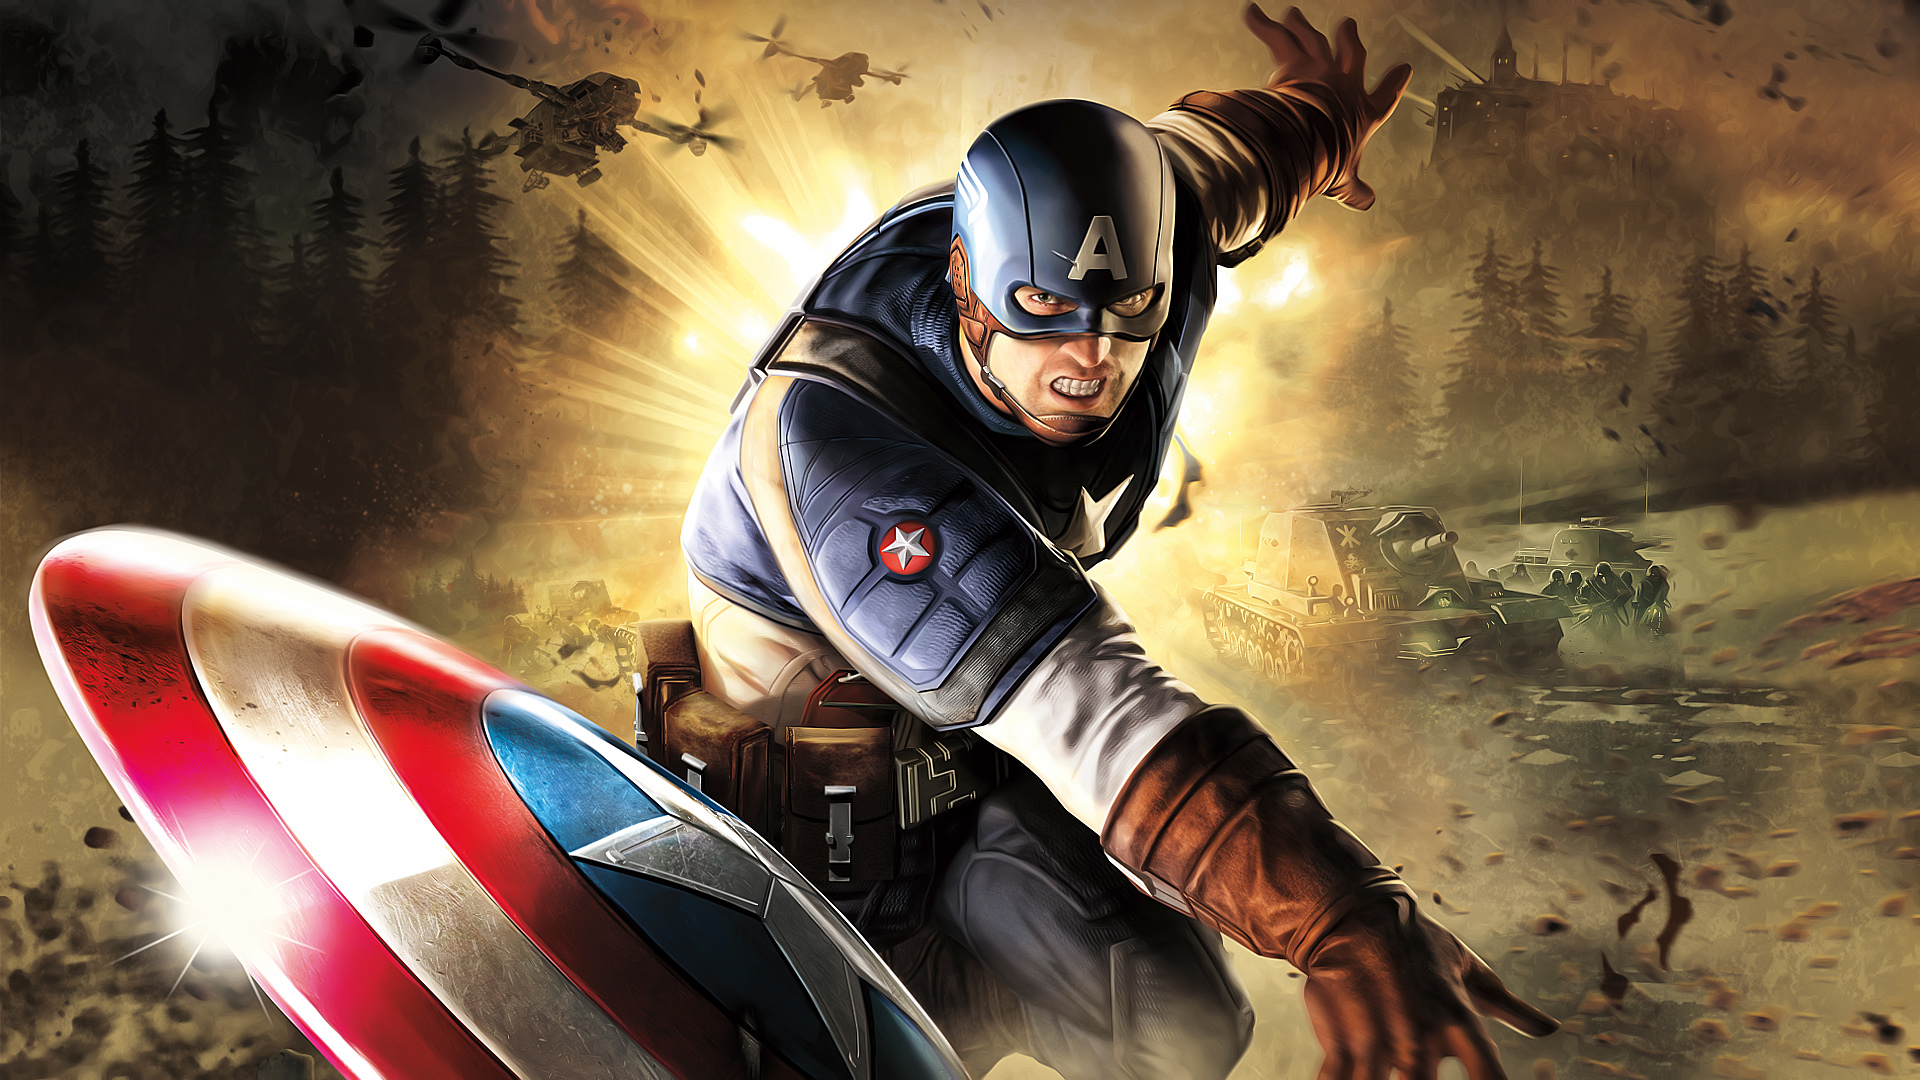 captain america Awesome Wallpapers